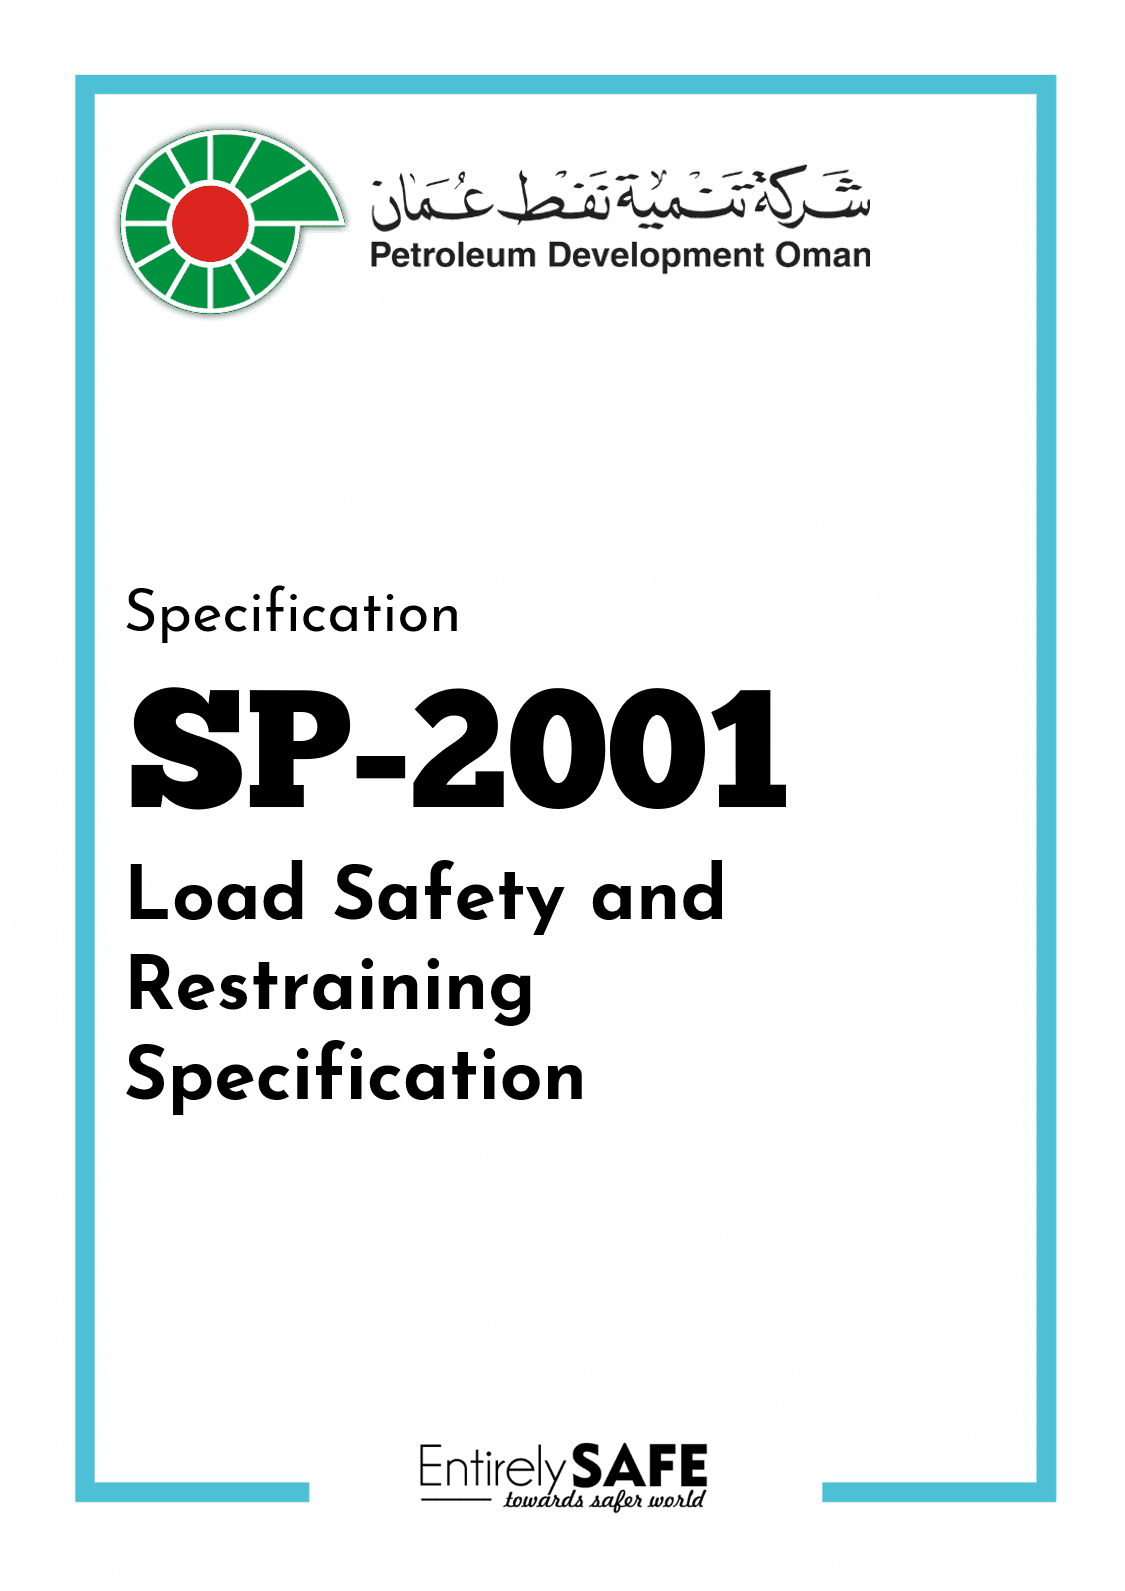 254-SP-2001-Load-Safety-and-Restraining-Specification-PDO-download-pdf